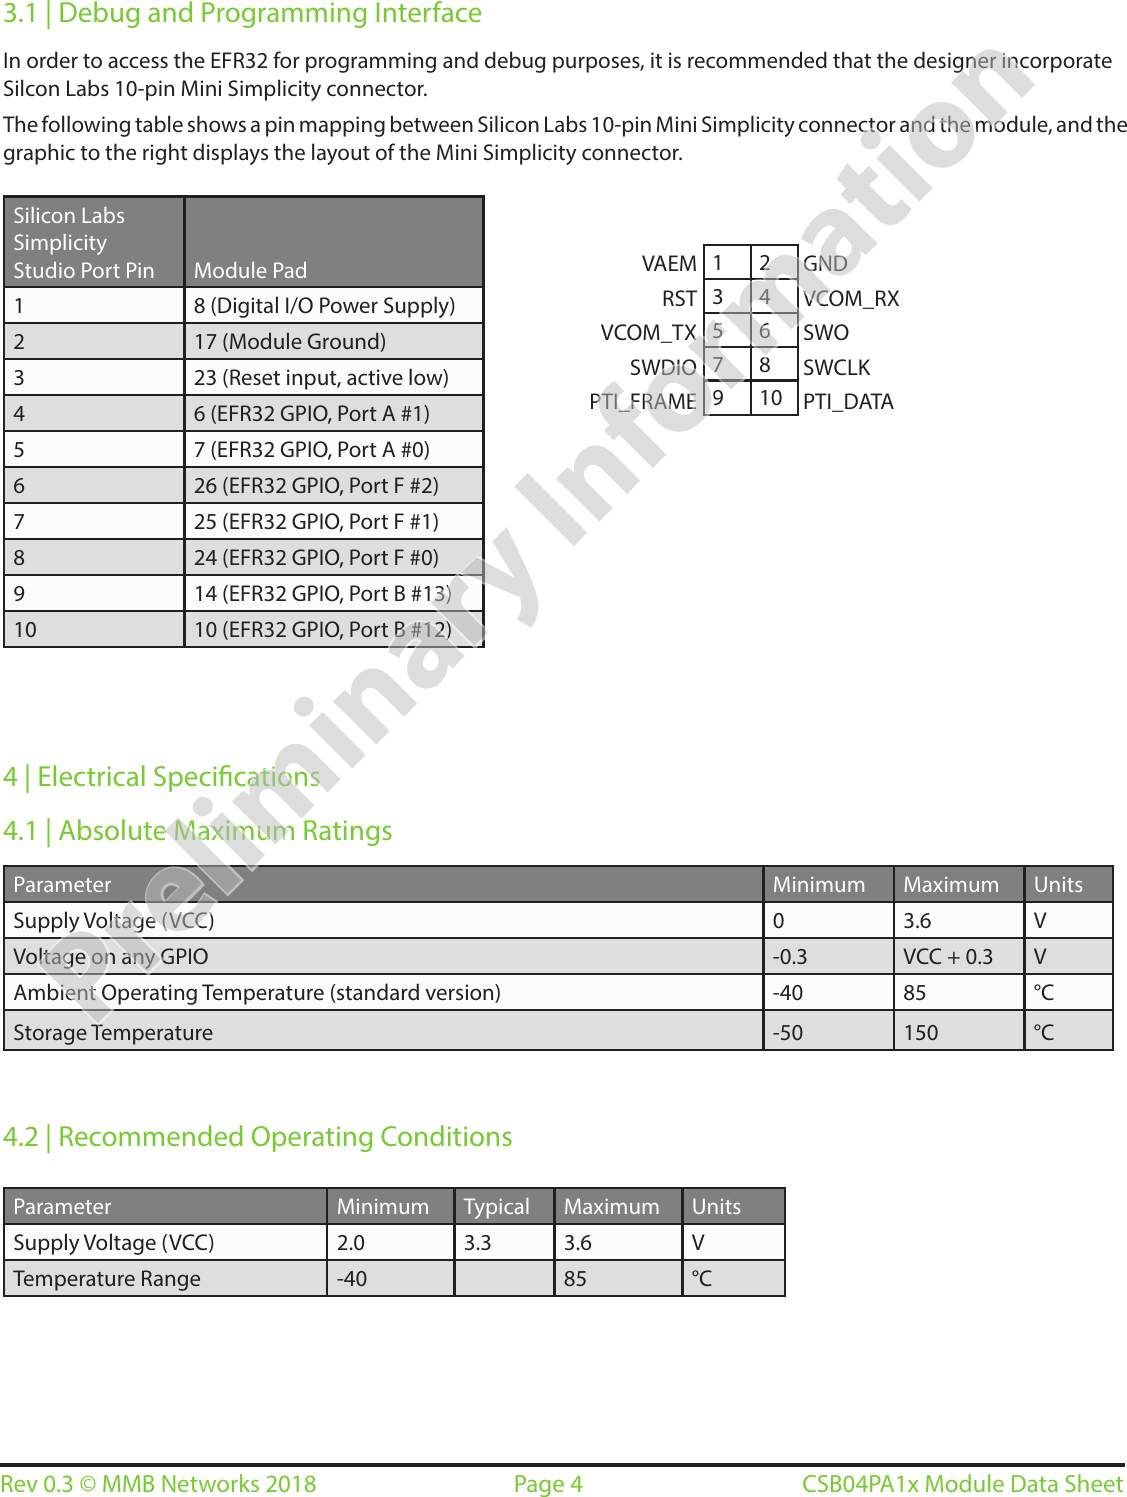 Page 4Rev 0.3 © MMB Networks 2018 CSB04PA1x Module Data Sheet3.1 | Debug and Programming InterfaceIn order to access the EFR32 for programming and debug purposes, it is recommended that the designer incorporate Silcon Labs 10-pin Mini Simplicity connector.  The following table shows a pin mapping between Silicon Labs 10-pin Mini Simplicity connector and the module, and the graphic to the right displays the layout of the Mini Simplicity connector.4 | Electrical Specications4.1 | Absolute Maximum RatingsParameter Minimum Maximum UnitsSupply Voltage (VCC) 0 3.6 VVoltage on any GPIO  -0.3 VCC + 0.3 VAmbient Operating Temperature (standard version) -40 85 °CStorage Temperature -50 150 °C4.2 | Recommended Operating ConditionsSilicon Labs Simplicity Studio Port Pin Module Pad1 8 (Digital I/O Power Supply)2 17 (Module Ground)3 23 (Reset input, active low)4 6 (EFR32 GPIO, Port A #1)5 7 (EFR32 GPIO, Port A #0)6 26 (EFR32 GPIO, Port F #2)7 25 (EFR32 GPIO, Port F #1)8 24 (EFR32 GPIO, Port F #0)9 14 (EFR32 GPIO, Port B #13)10 10 (EFR32 GPIO, Port B #12)Parameter Minimum Typical Maximum UnitsSupply Voltage (VCC) 2.0 3.3 3.6 VTemperature Range -40 85 °C1 23 45 67 89 10VAEMRSTVCOM_TXSWDIOPTI_FRAMEGNDVCOM_RXSWOSWCLKPTI_DATAPreliminary Information